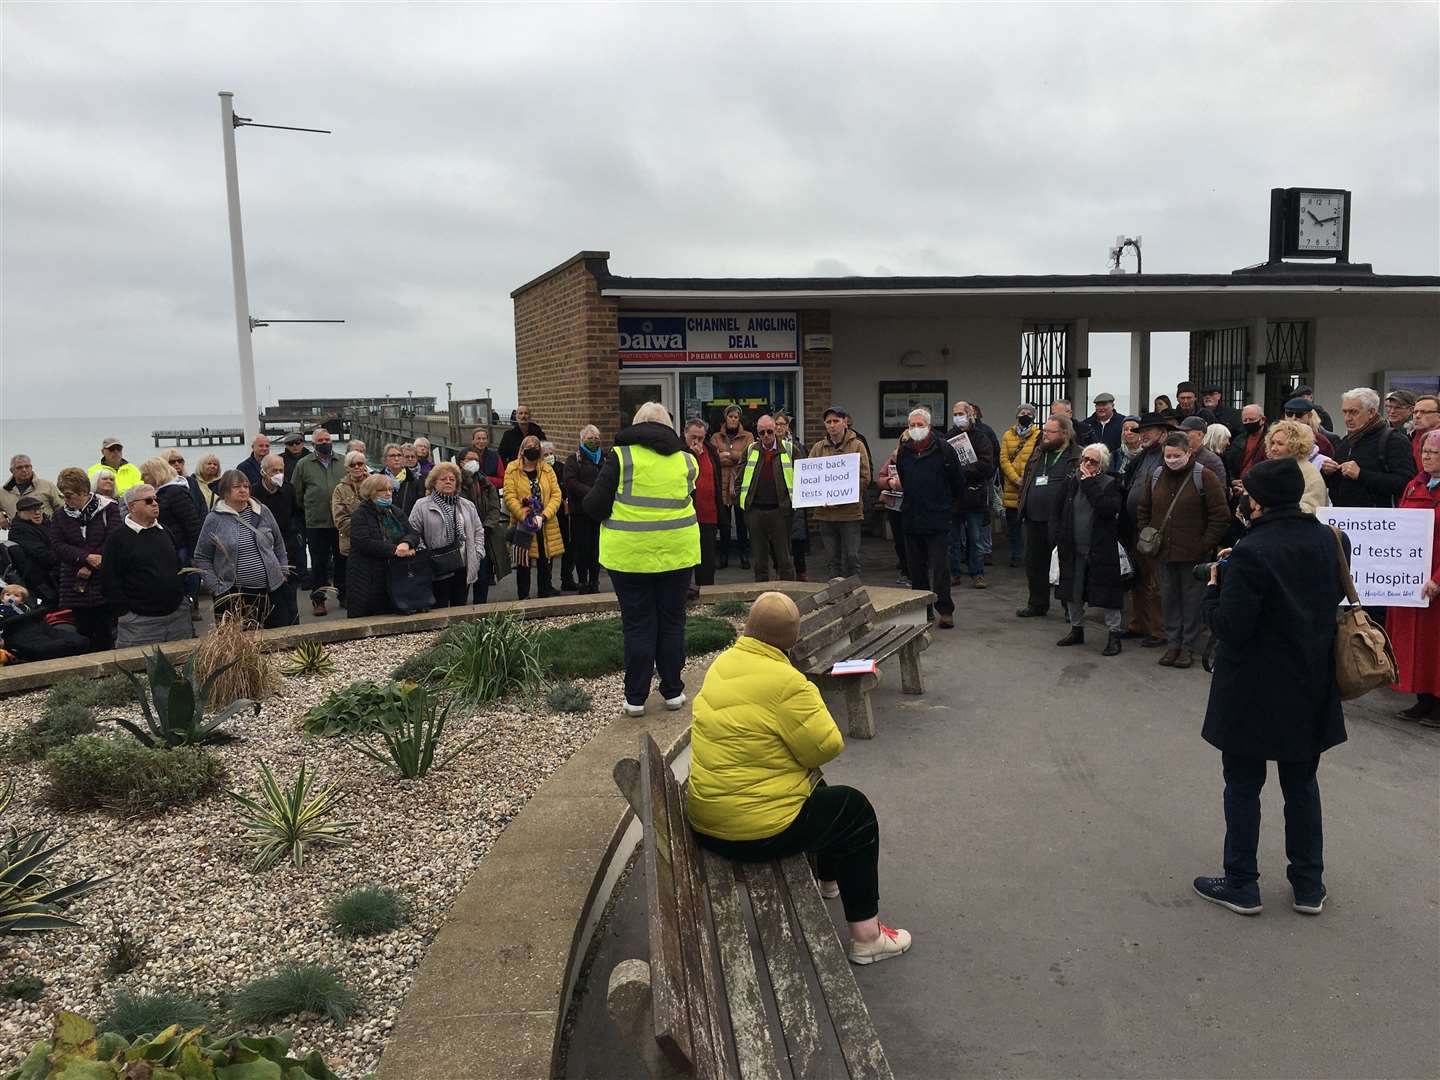 Protesters met on Saturday to campaign against the closure of blood tests at Deal hospital. Picture: Tony Grist